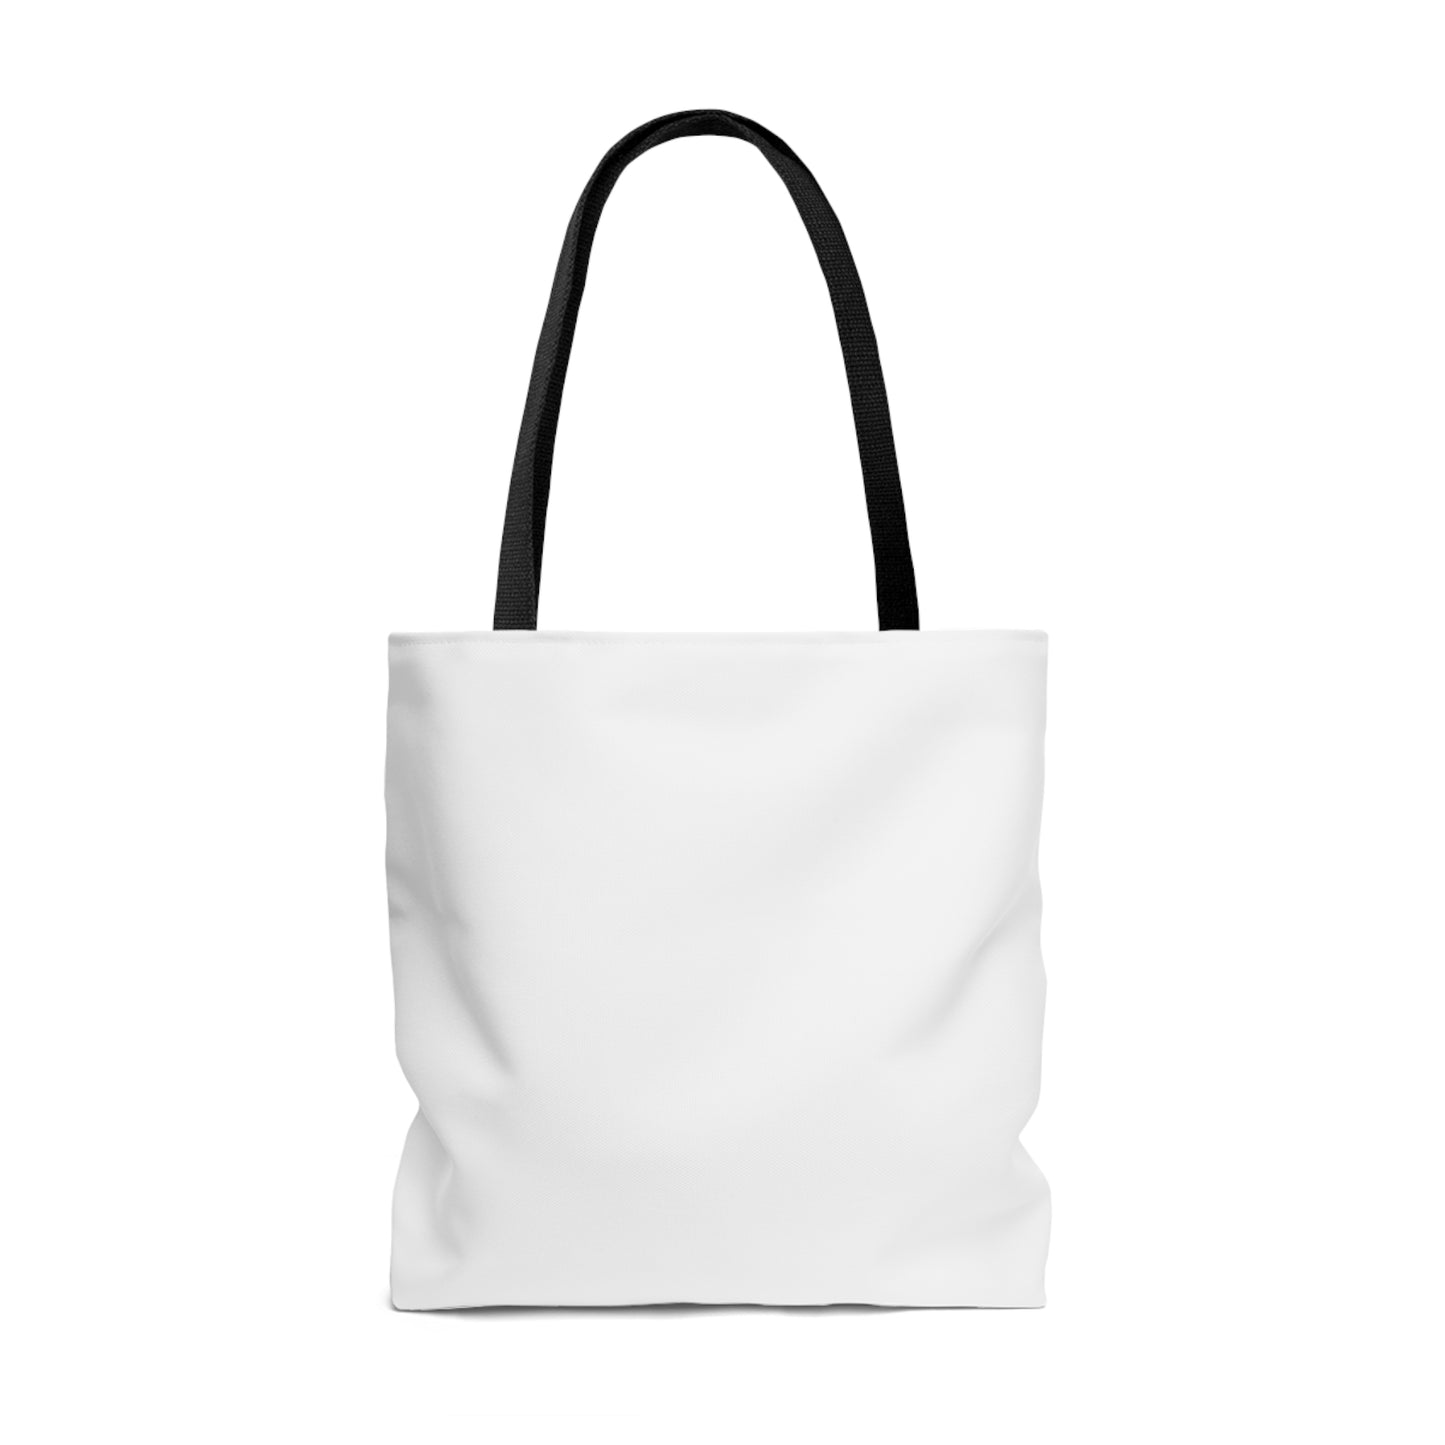 Christ Is The Way, The Truth, & The Light Of My LIfe Tote Bag